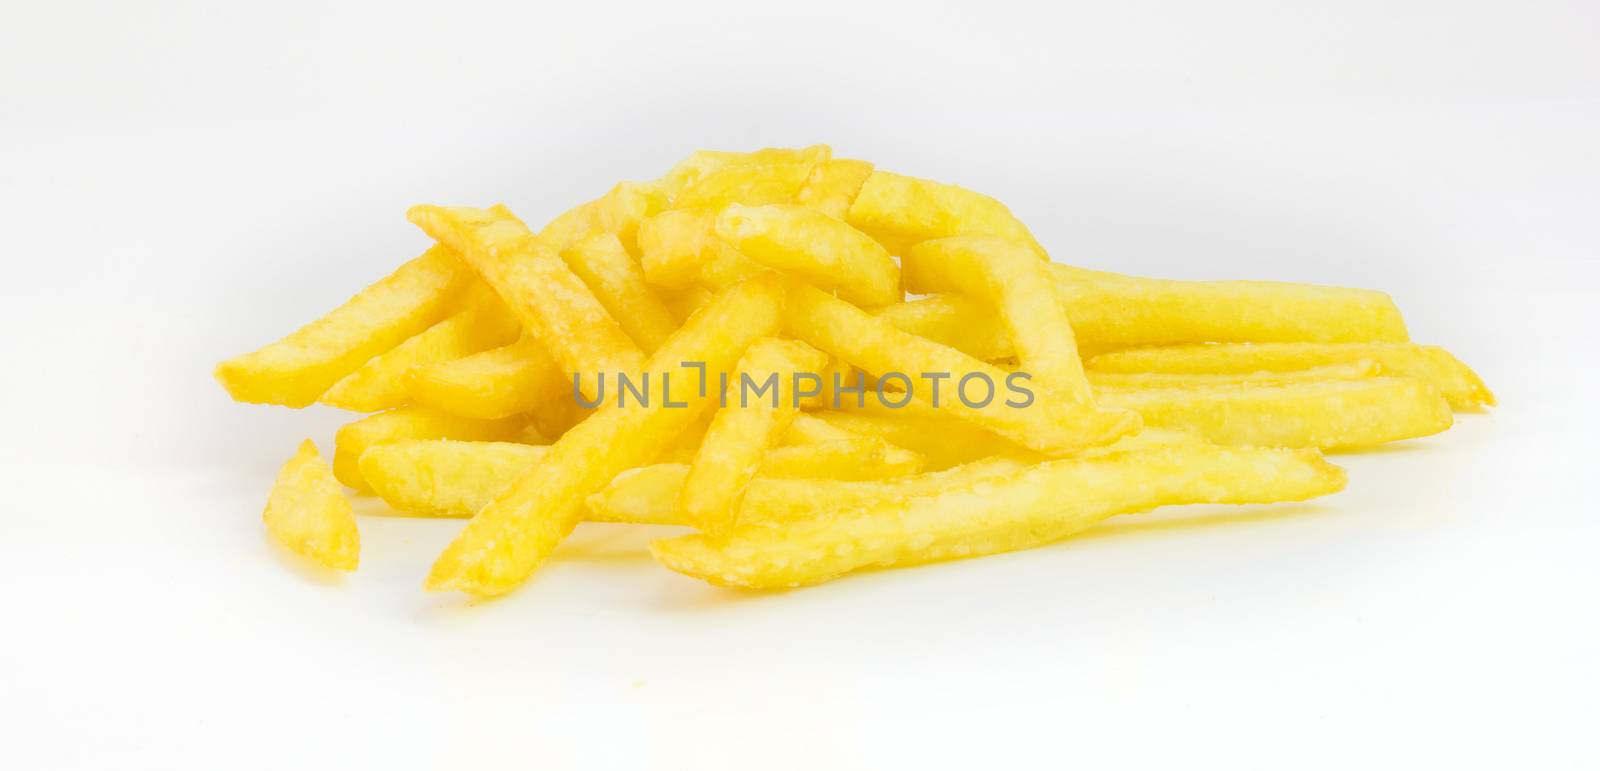 popular fast food french fries isolated on white background